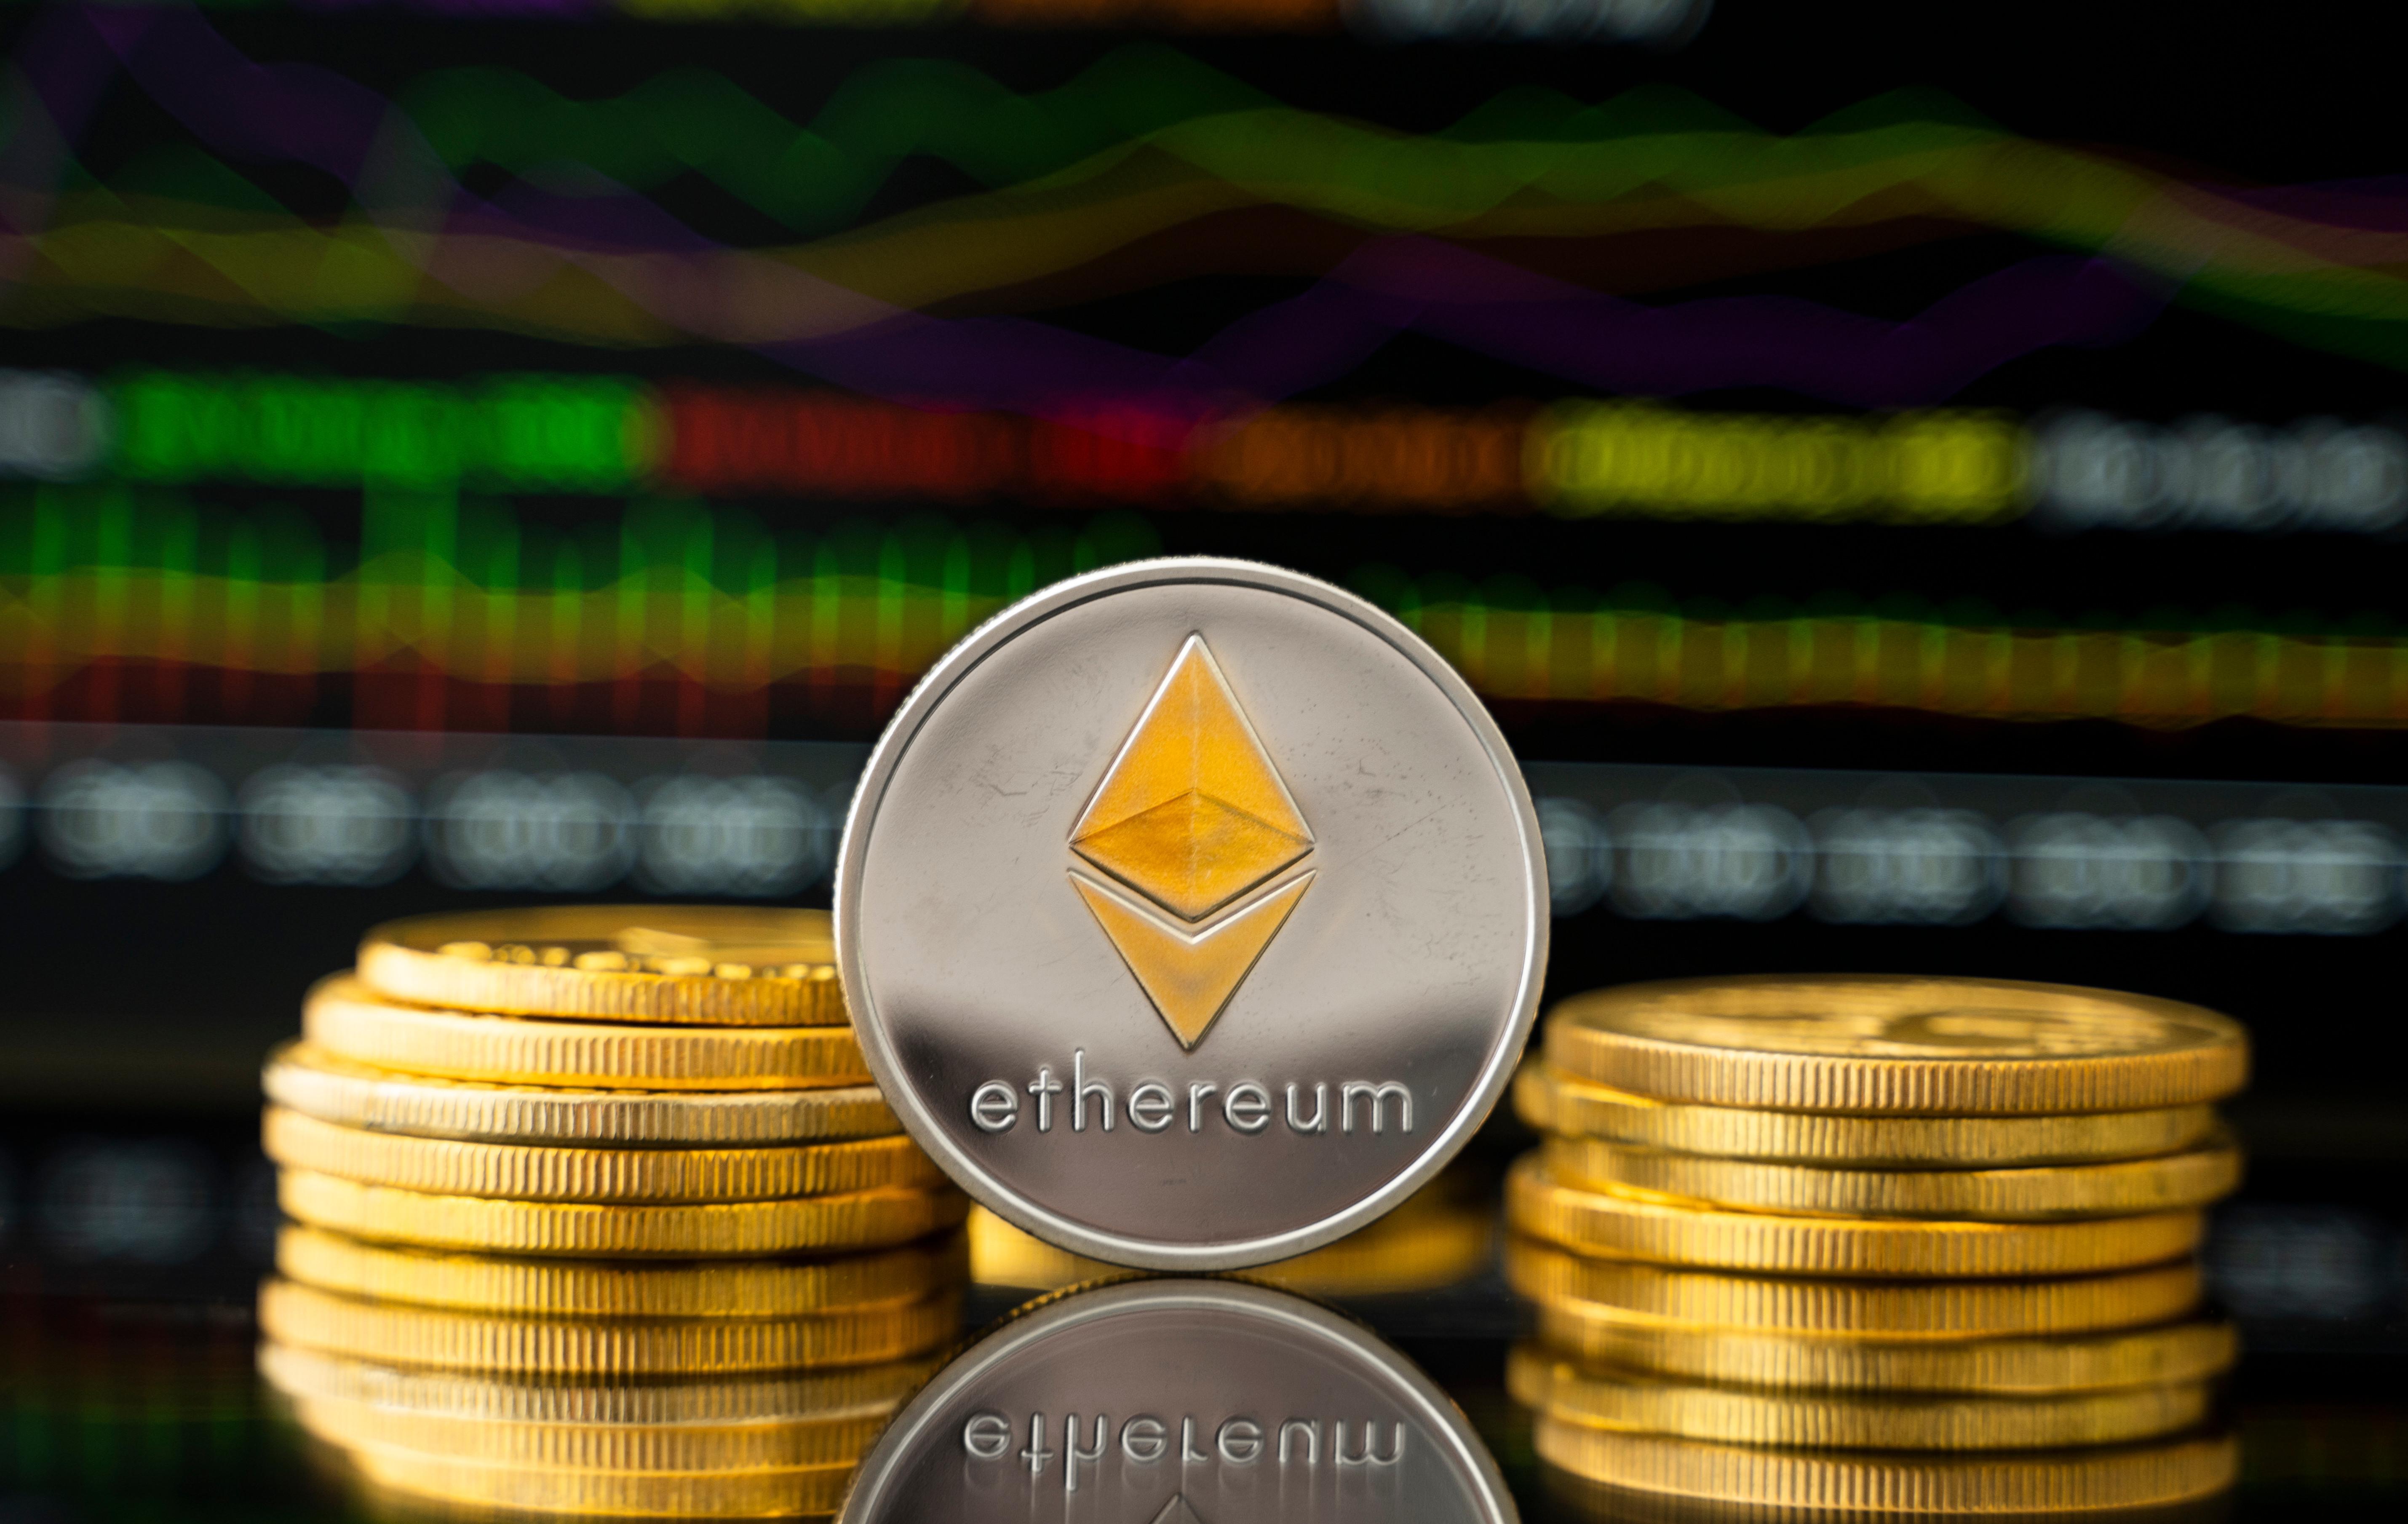 Ethereum price: Indicators signal room for further gains